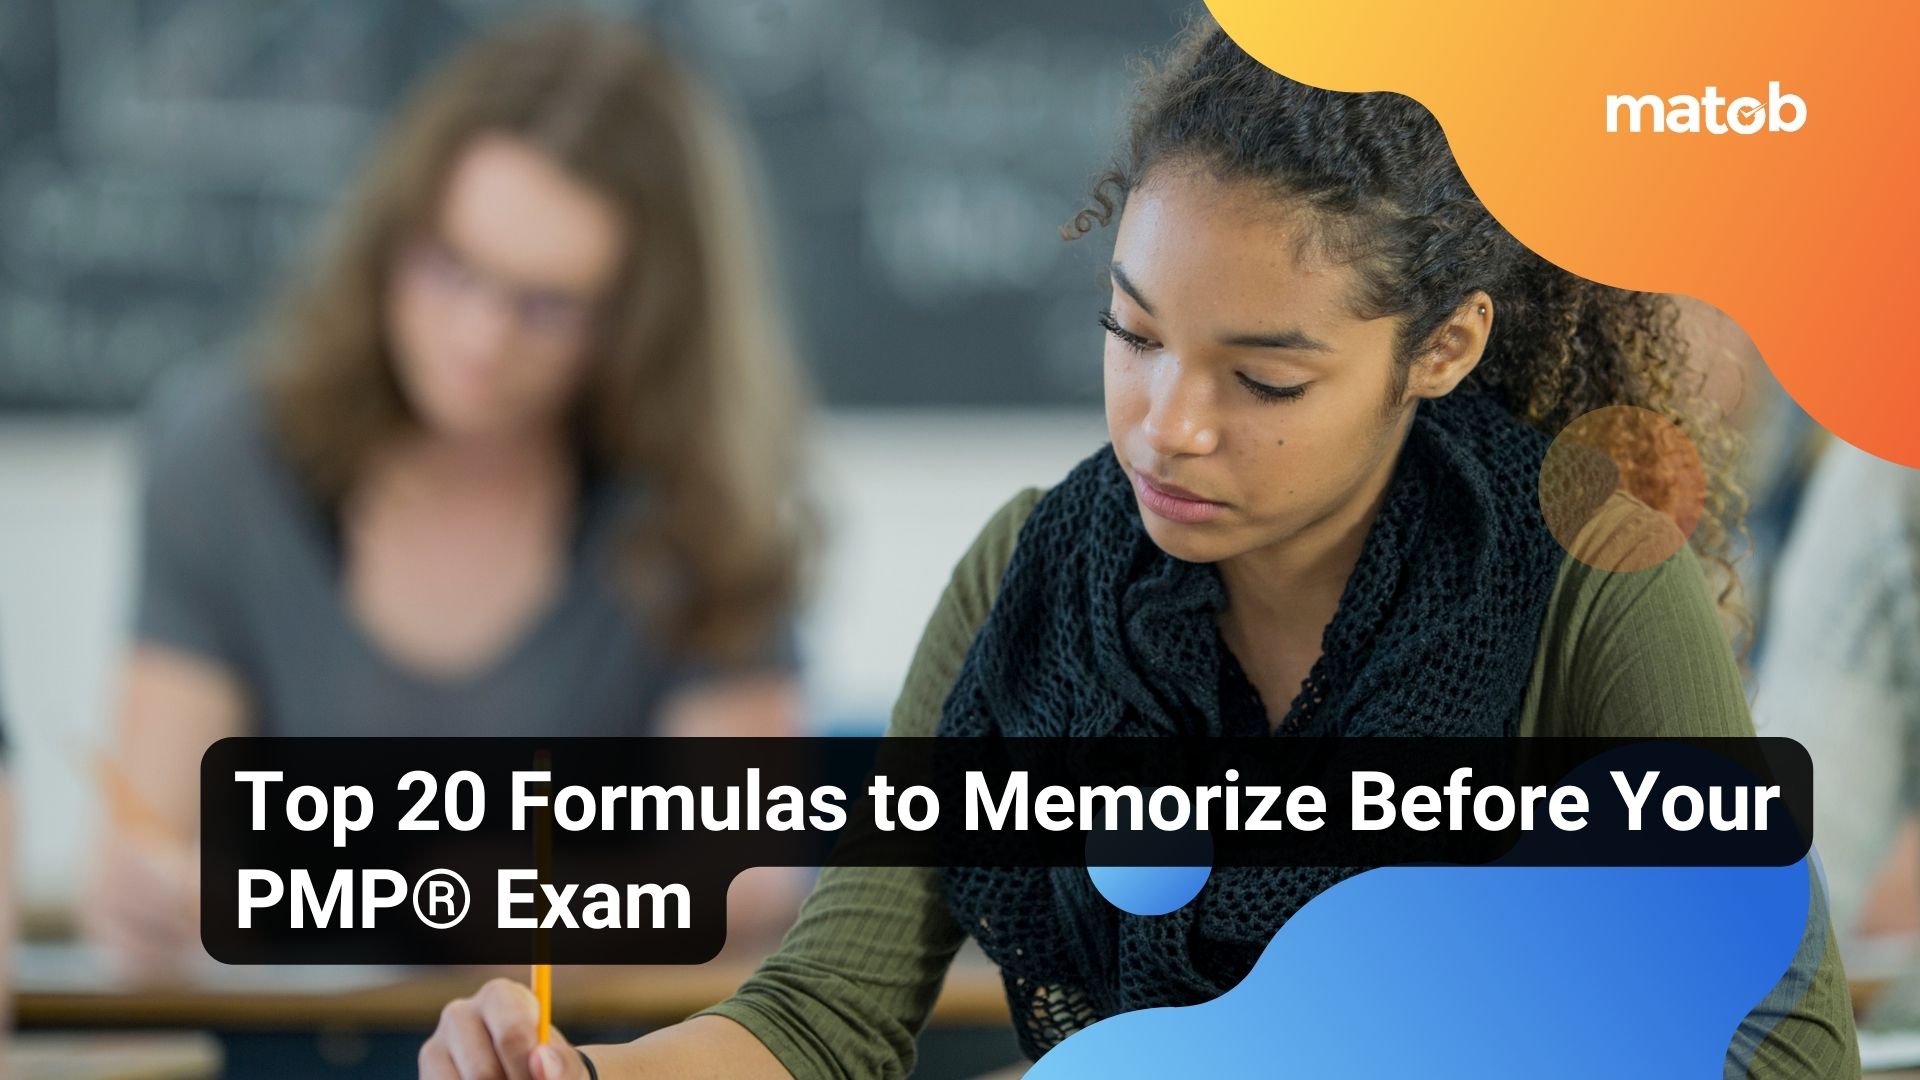 Top 20 Formulas to Memorize Before Your PMP® Exam